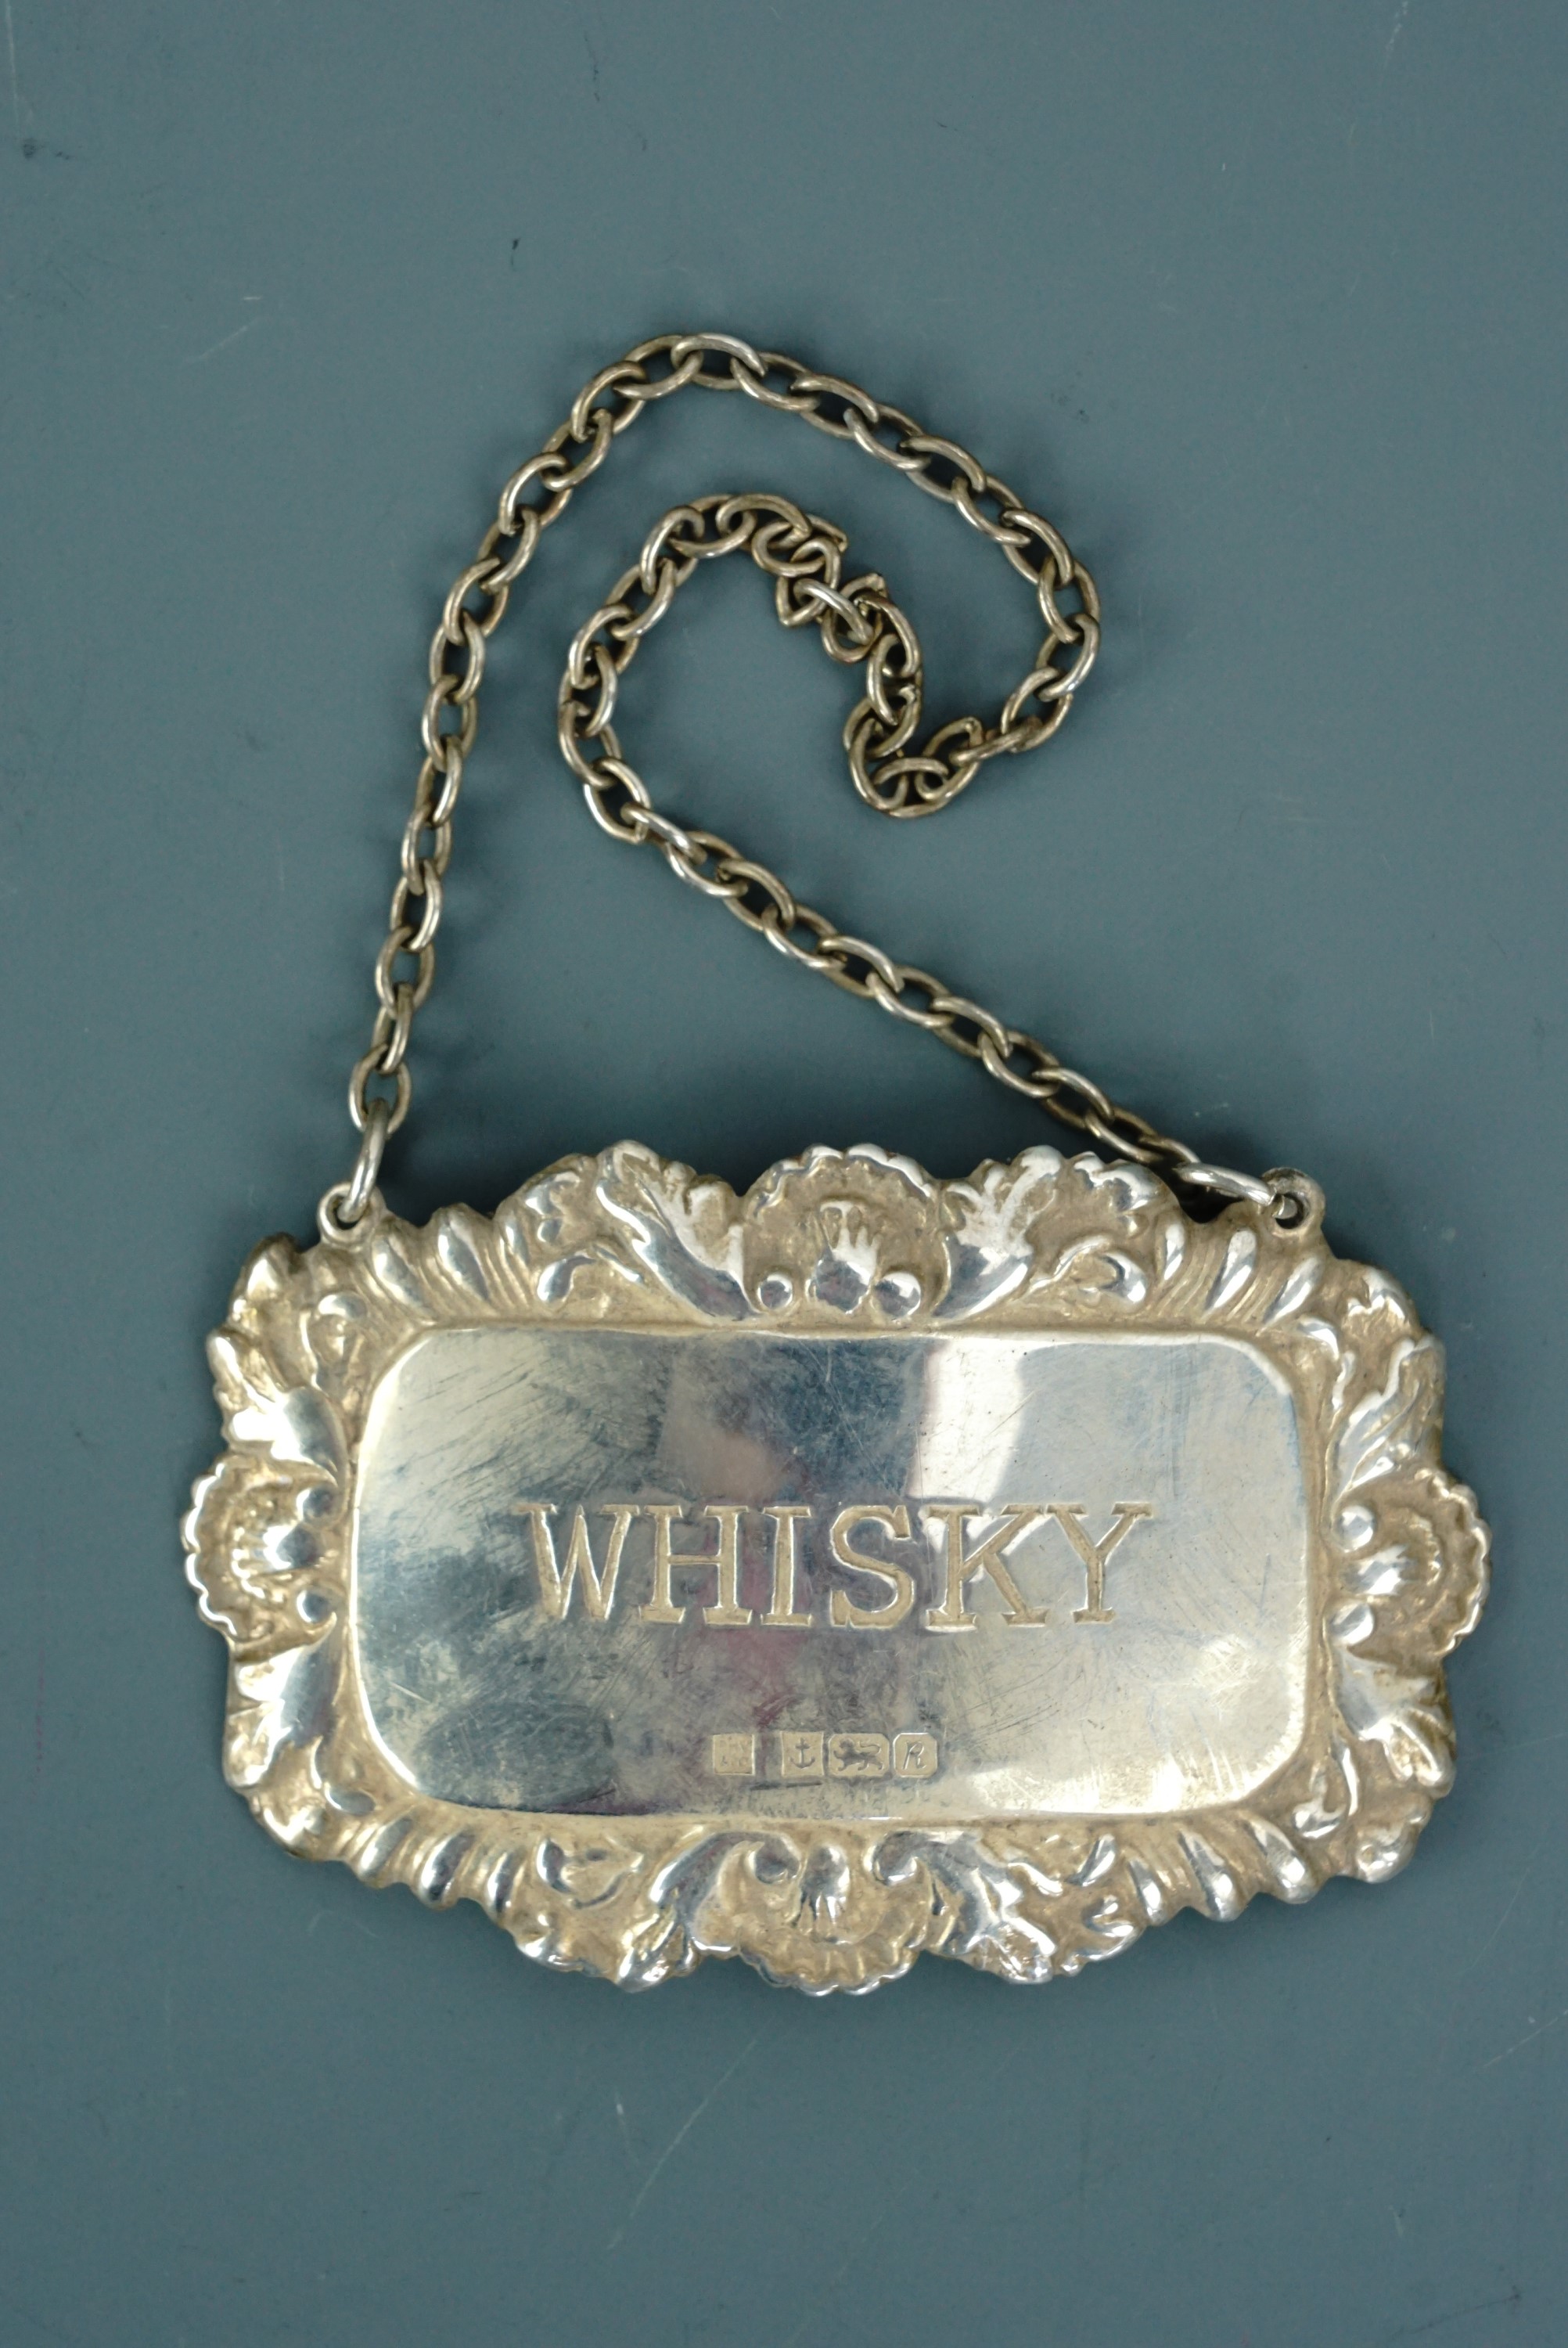 A silver whisky decanter label